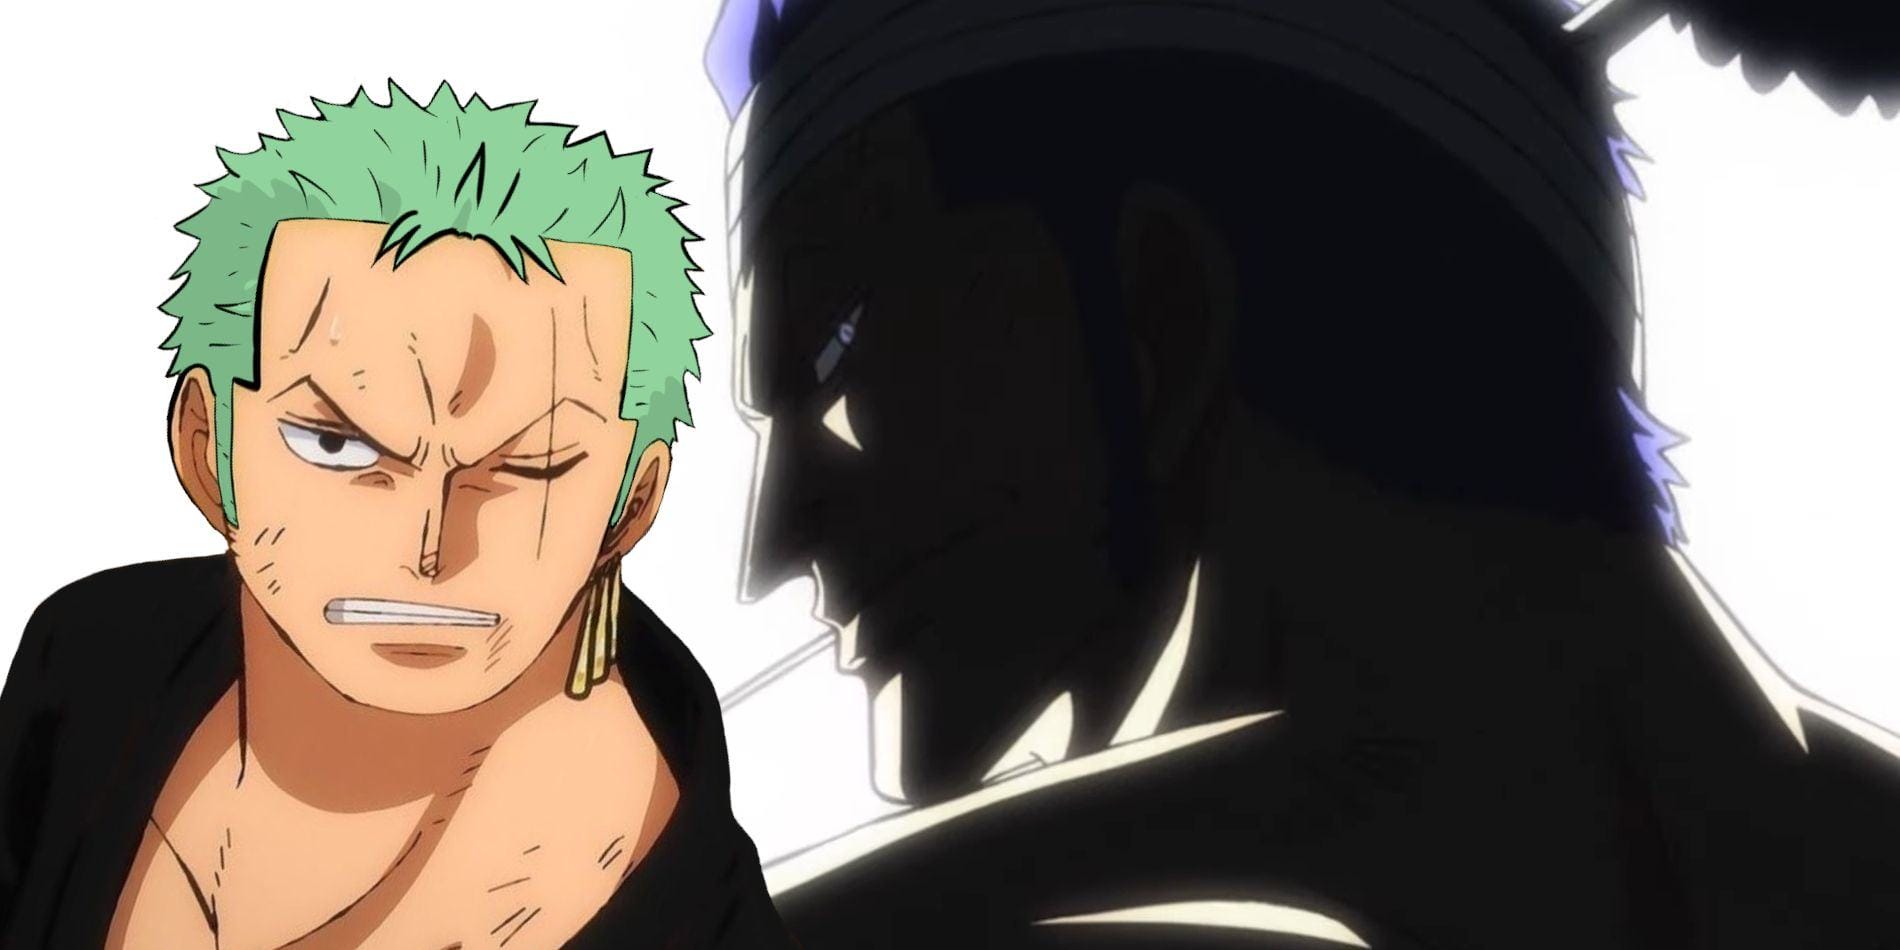 An image of what is likely an Wano relative of Zoro is seen looking over his shoulder while a white light awaits in front of them. An image of Zoro rests on the left side, looking determined towards the relative.